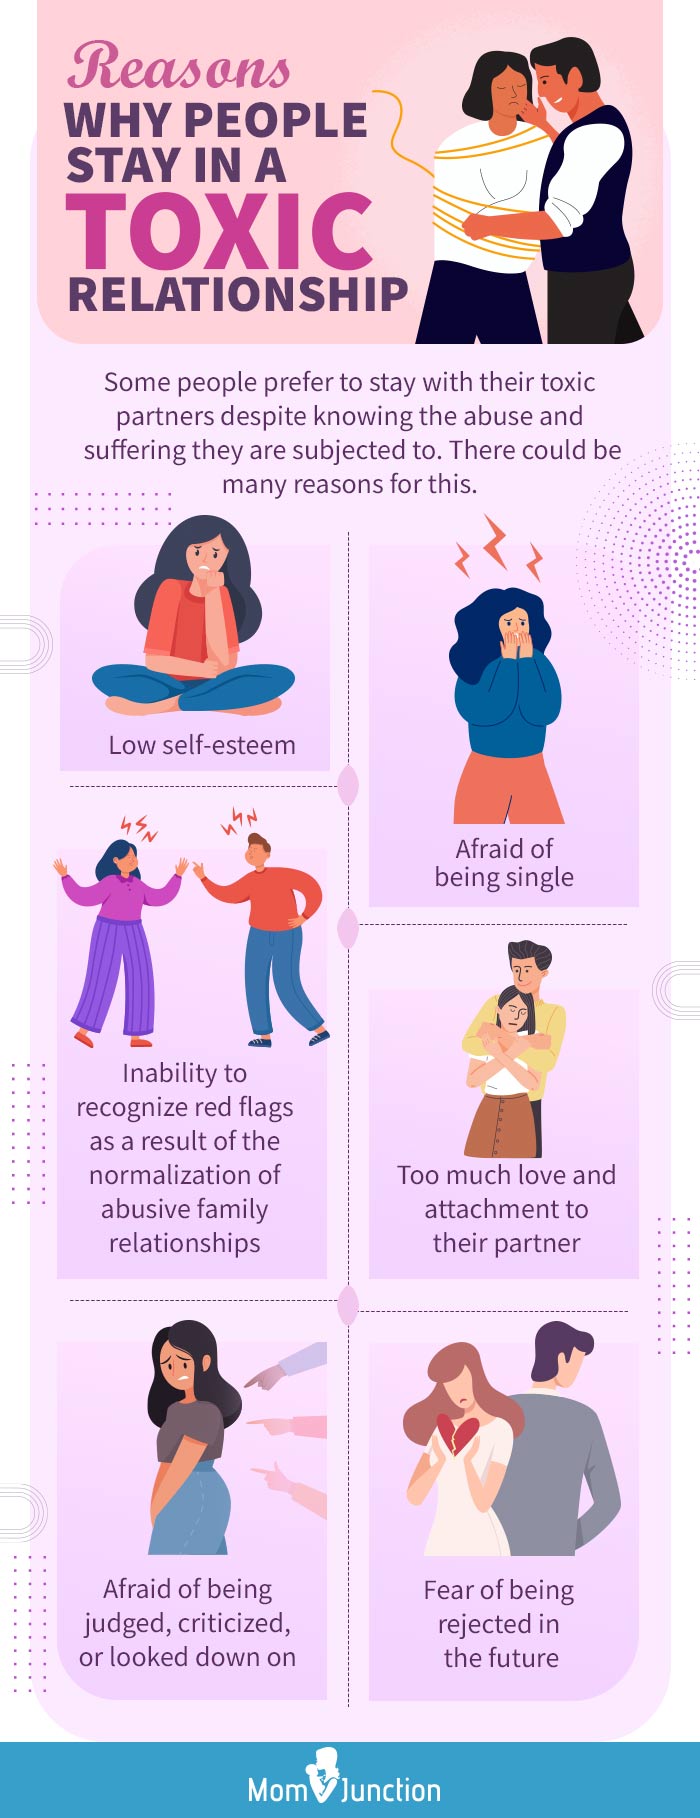 reasons why people stay in a toxic relationship [infographic]